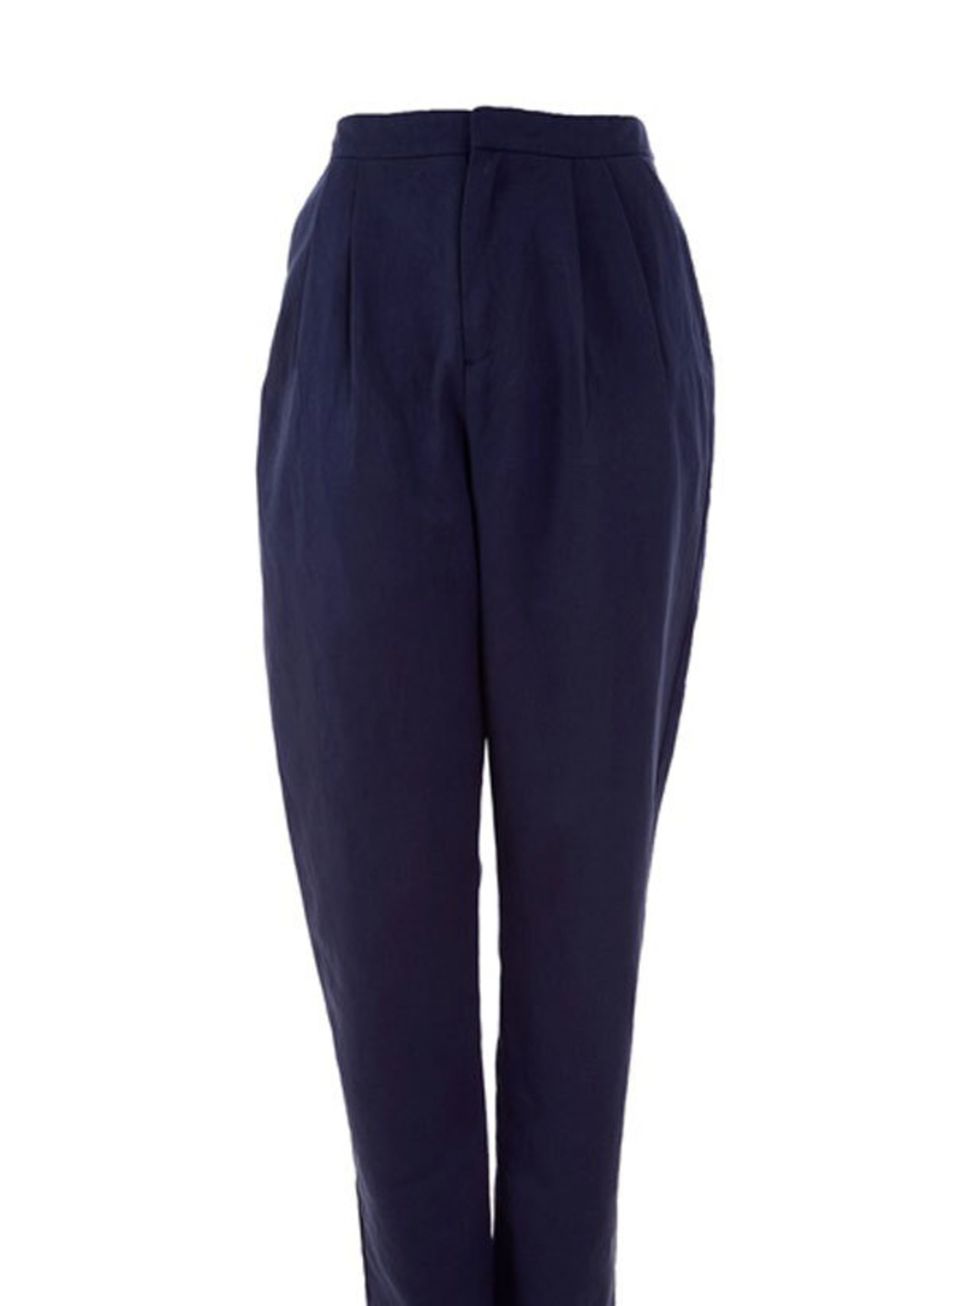 <p>Navy tapered trousers, £125, by YMC at <a href="If%20you%E2%80%99re%20contemplating%20a%20summer%20of%20festivals,%20parks%20and%20beer%20gardens,%20add%20a%20straw%20boater%20to%20your%20wardrobe%20essentials.%20Guaranteed%20to%20keep%20you%20stylishl